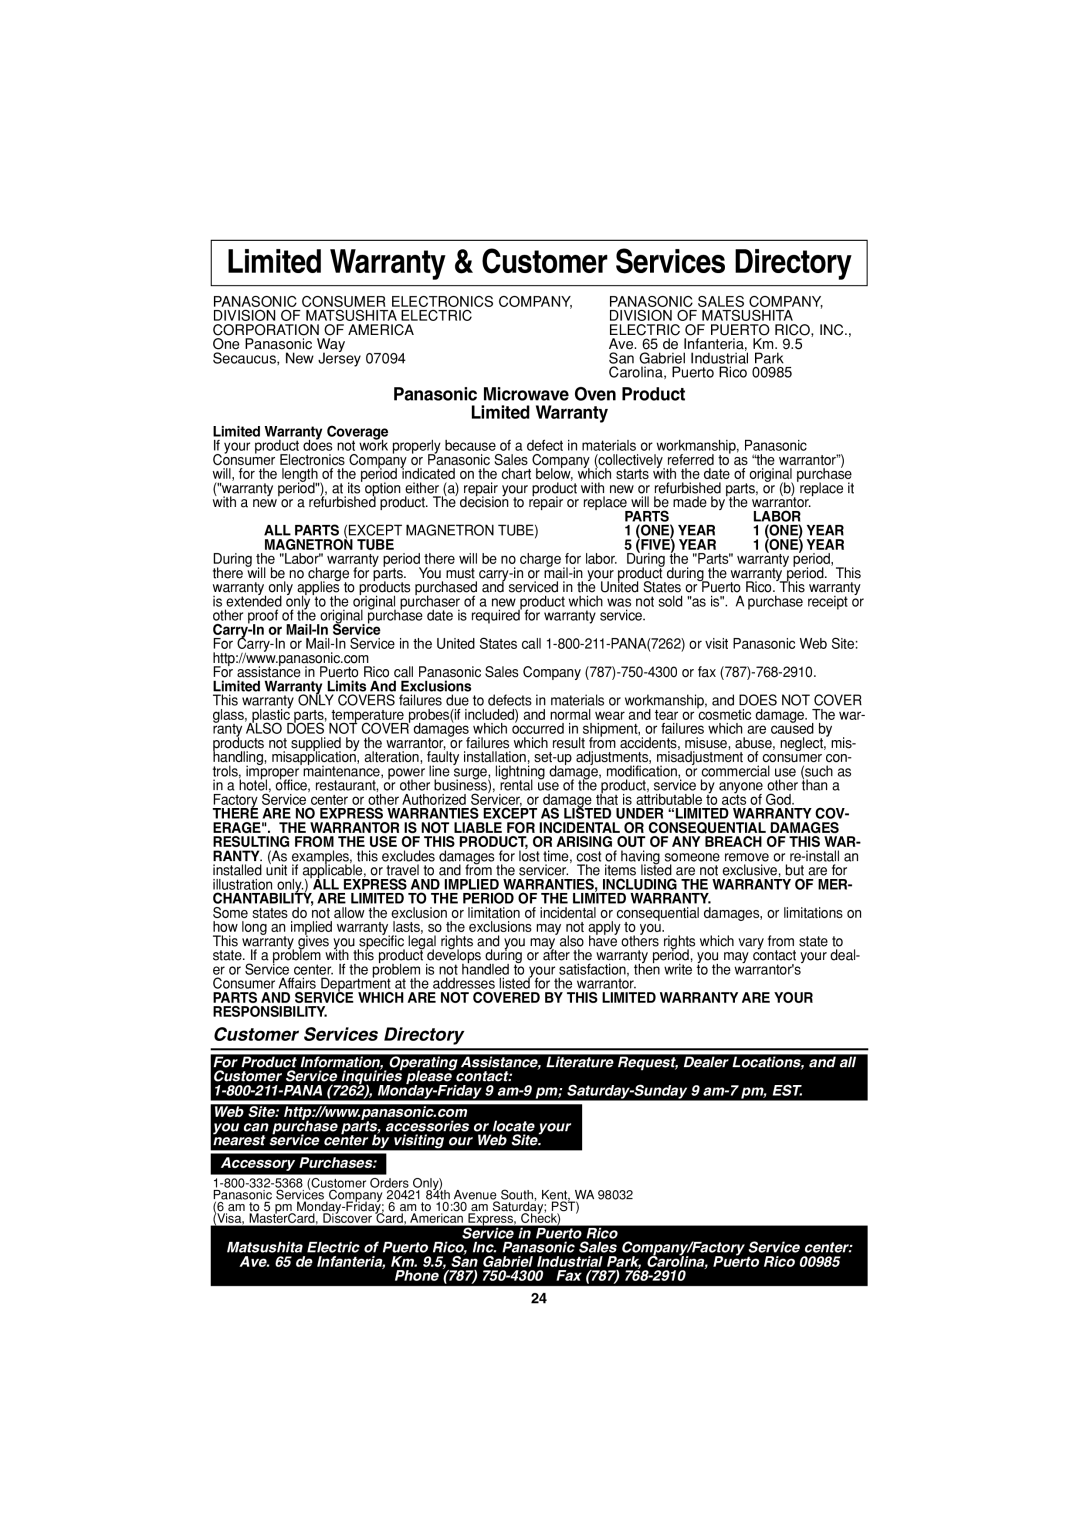 Panasonic NN-S553, NN-S503 Limited Warranty & Customer Services Directory, Accessory Purchases, Service in Puerto Rico 